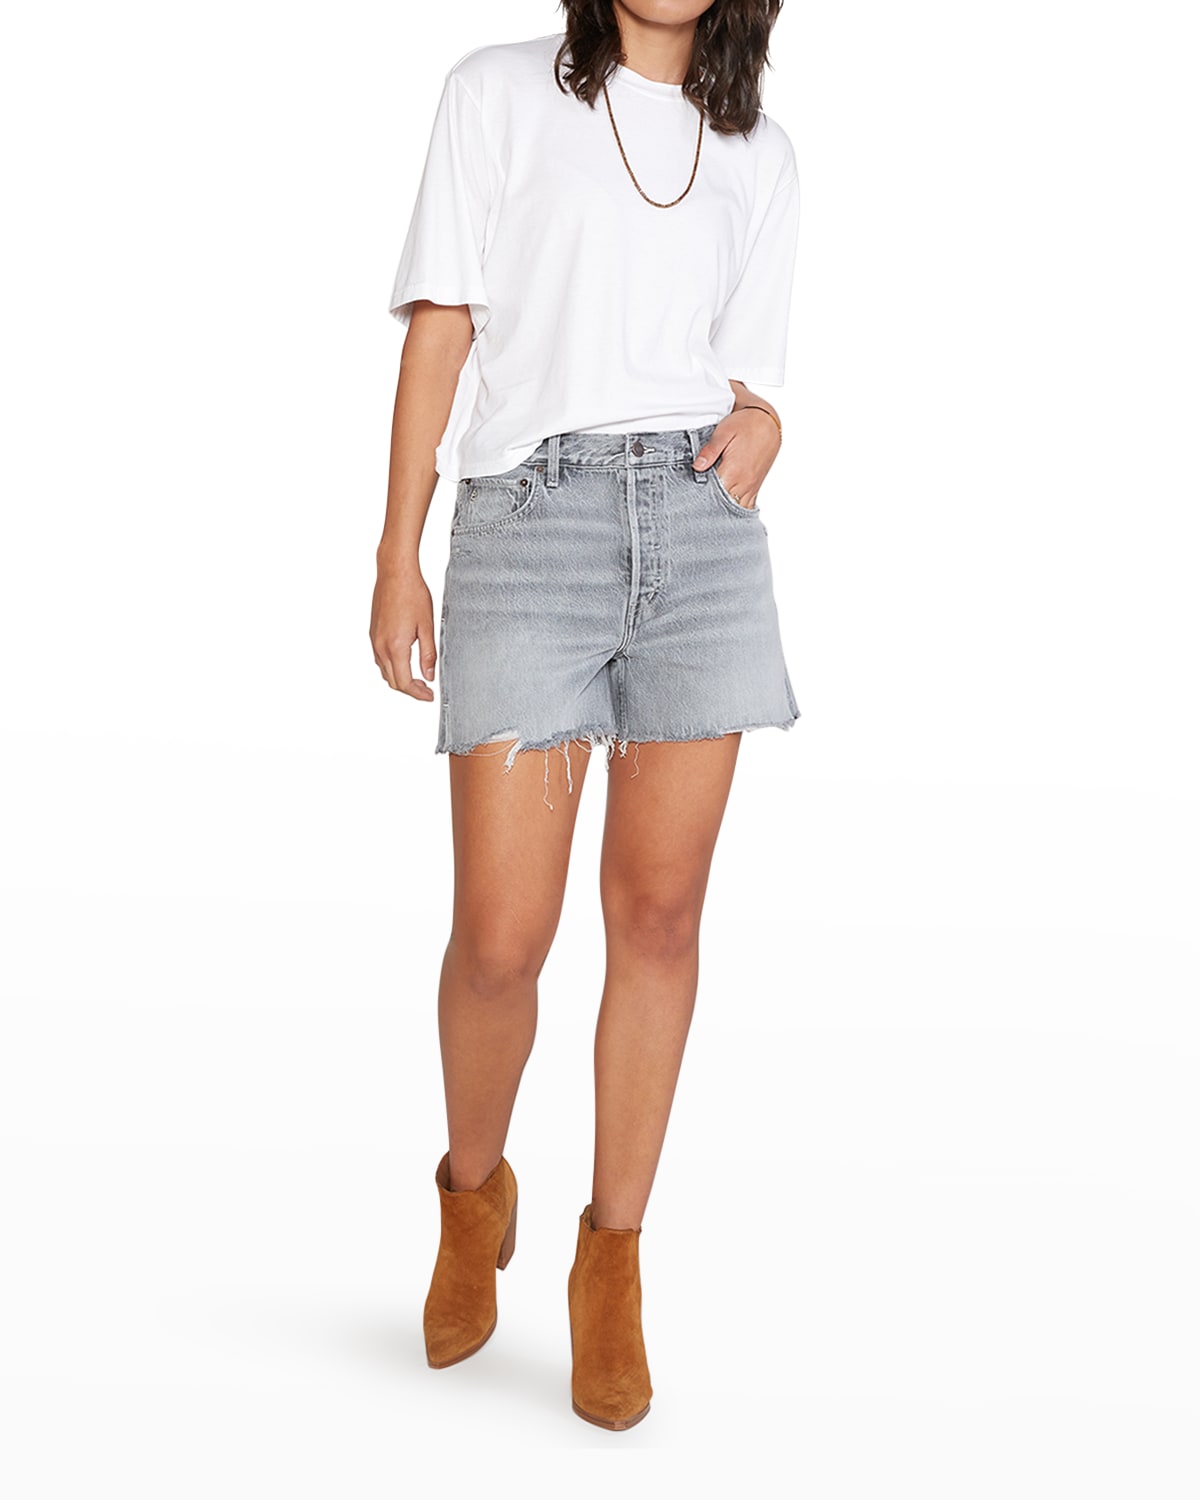 ETICA Haven Organic Cotton Slouchy Distressed Jean Shorts